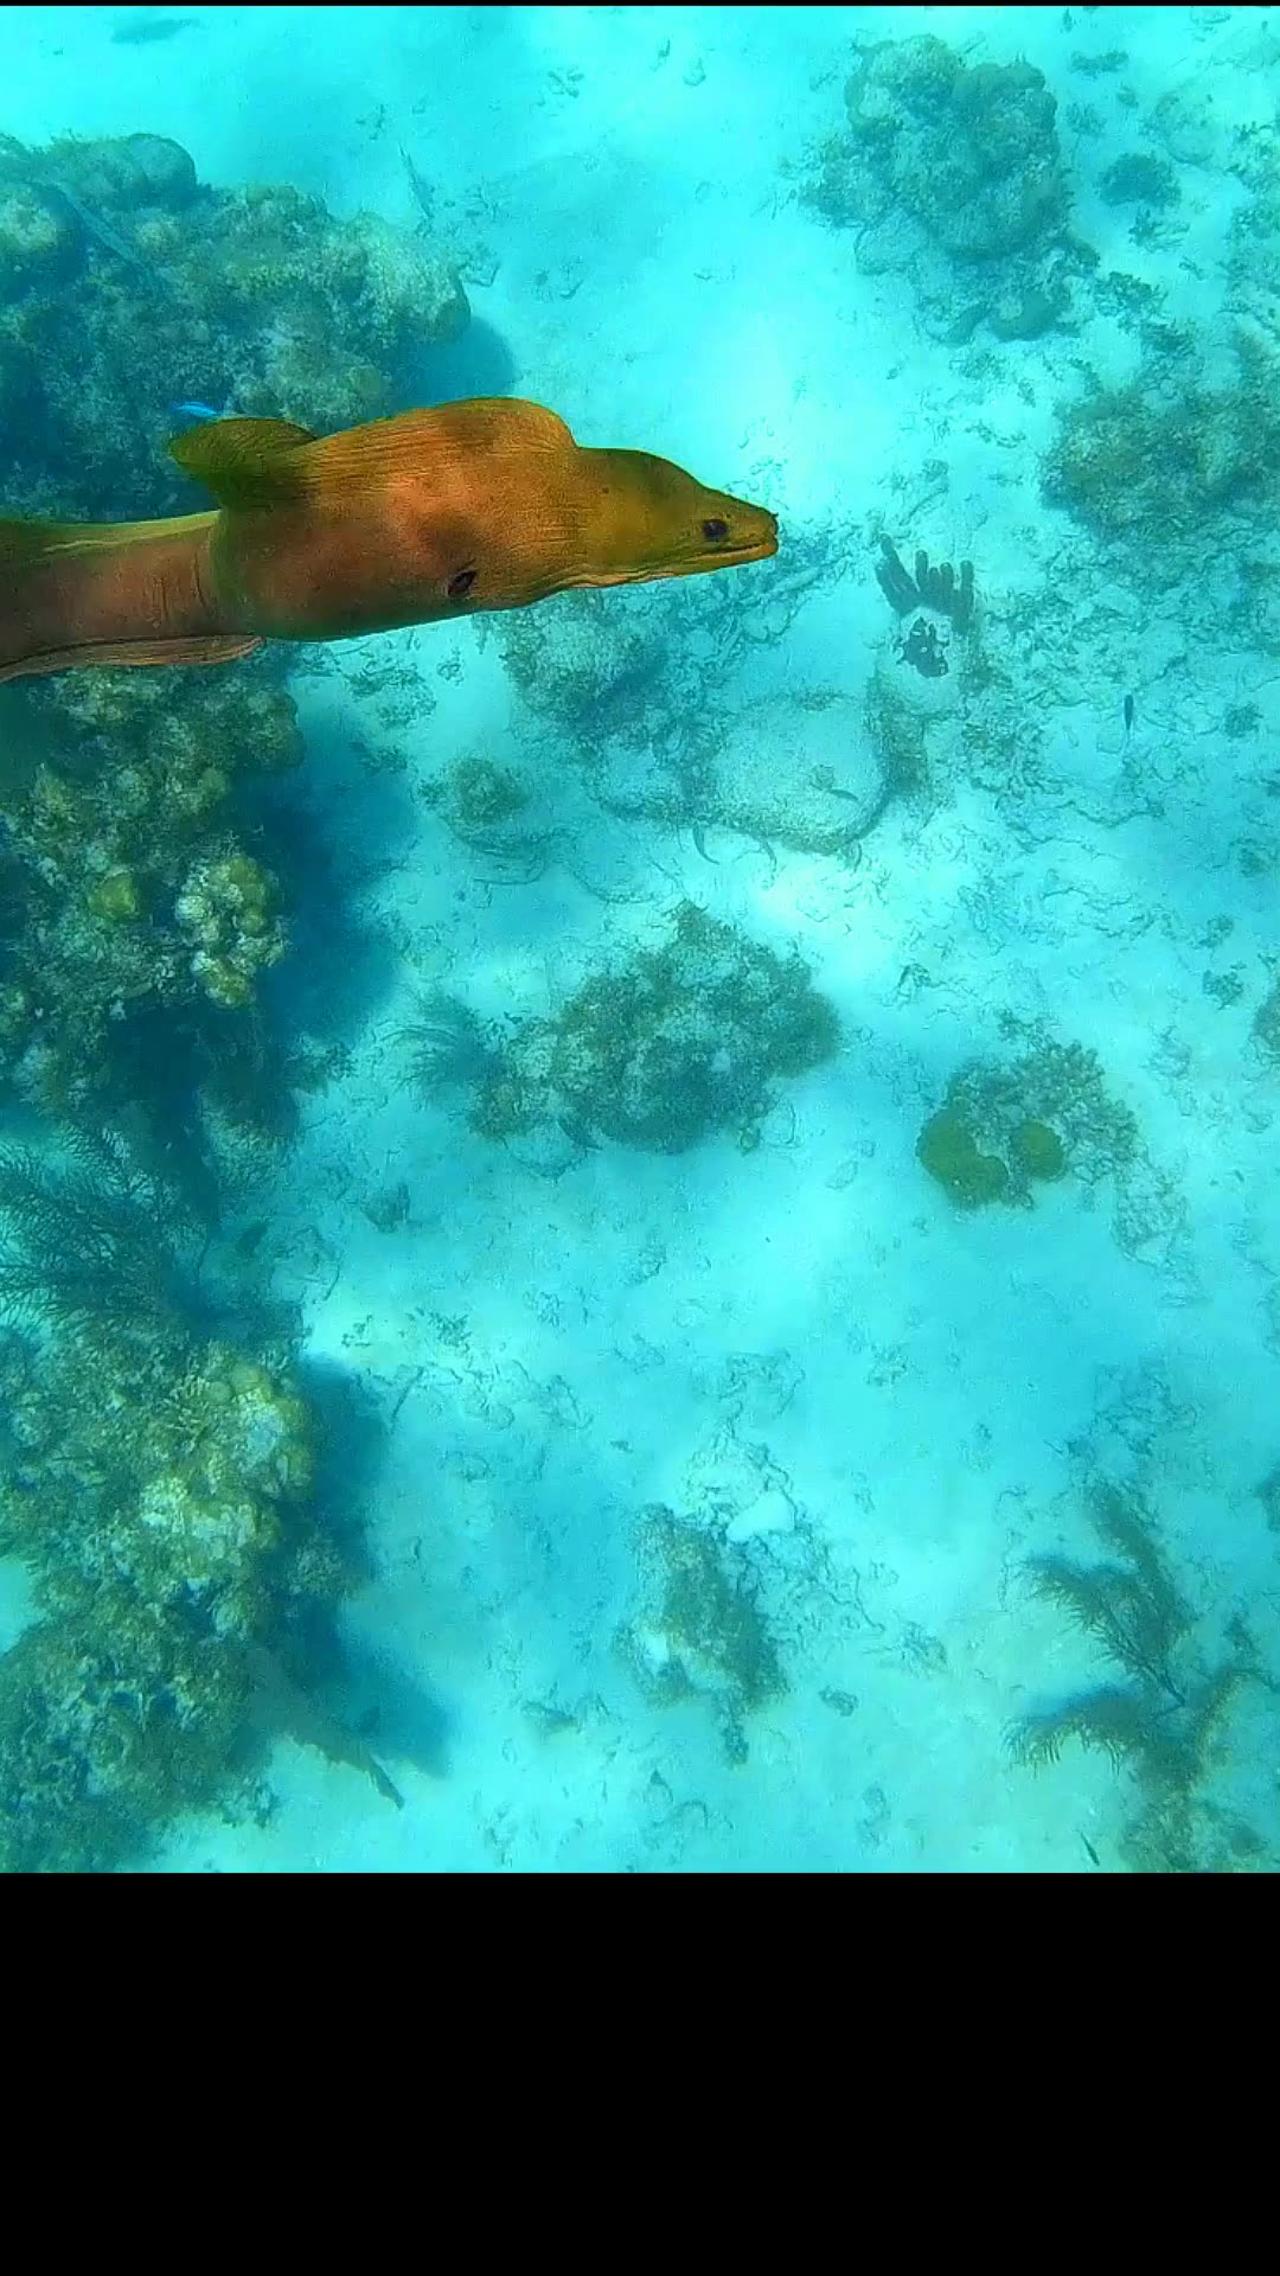 Almost attacked by a morey eel